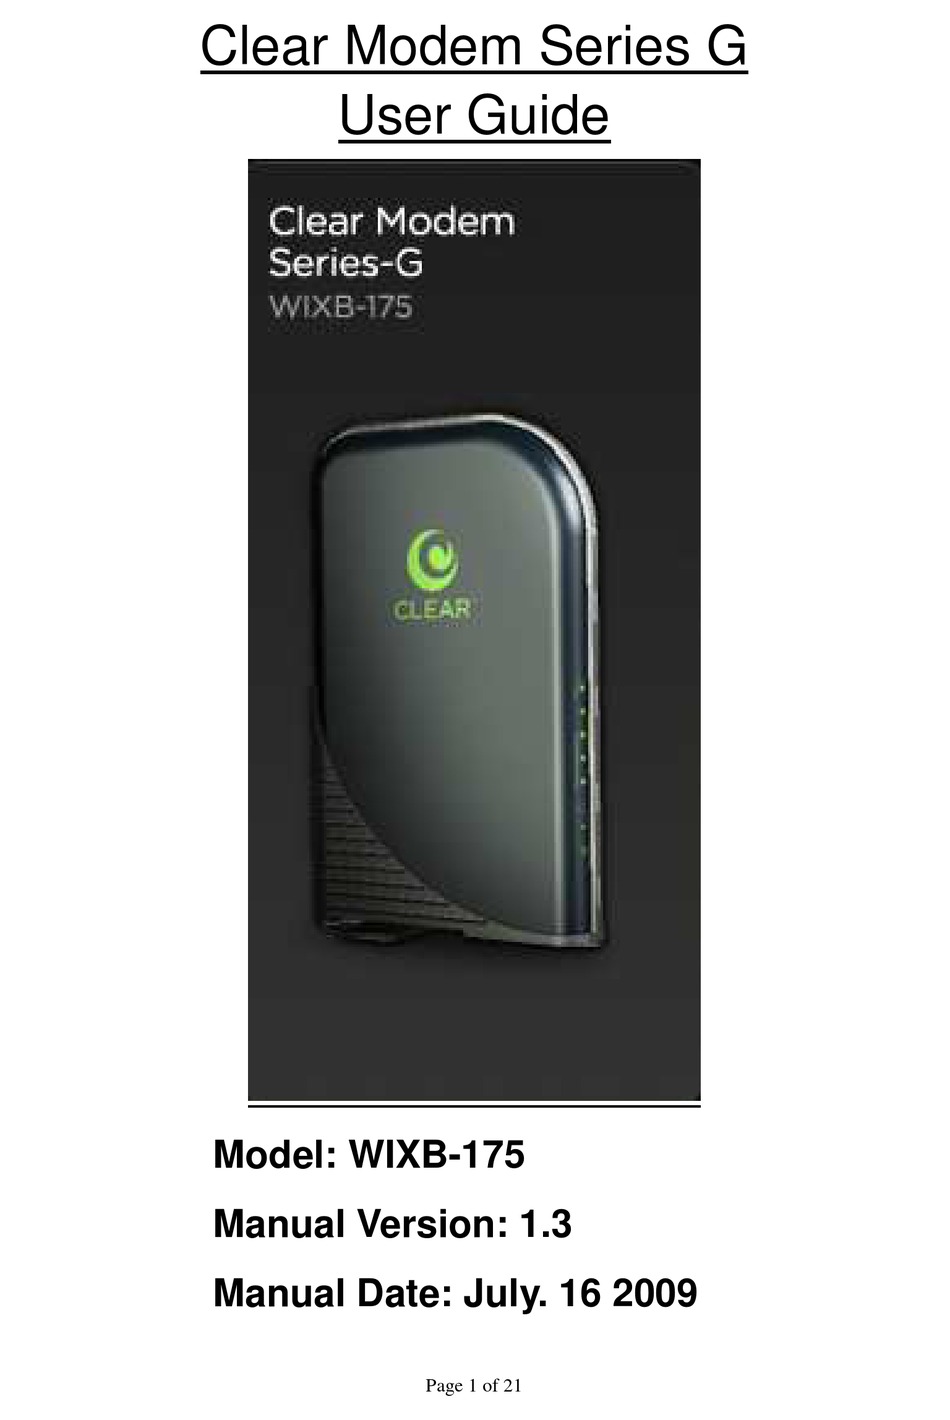 UPGRADE or REPLACE Your CLEAR 4G Modem WIXB175 Series G Home Modem 